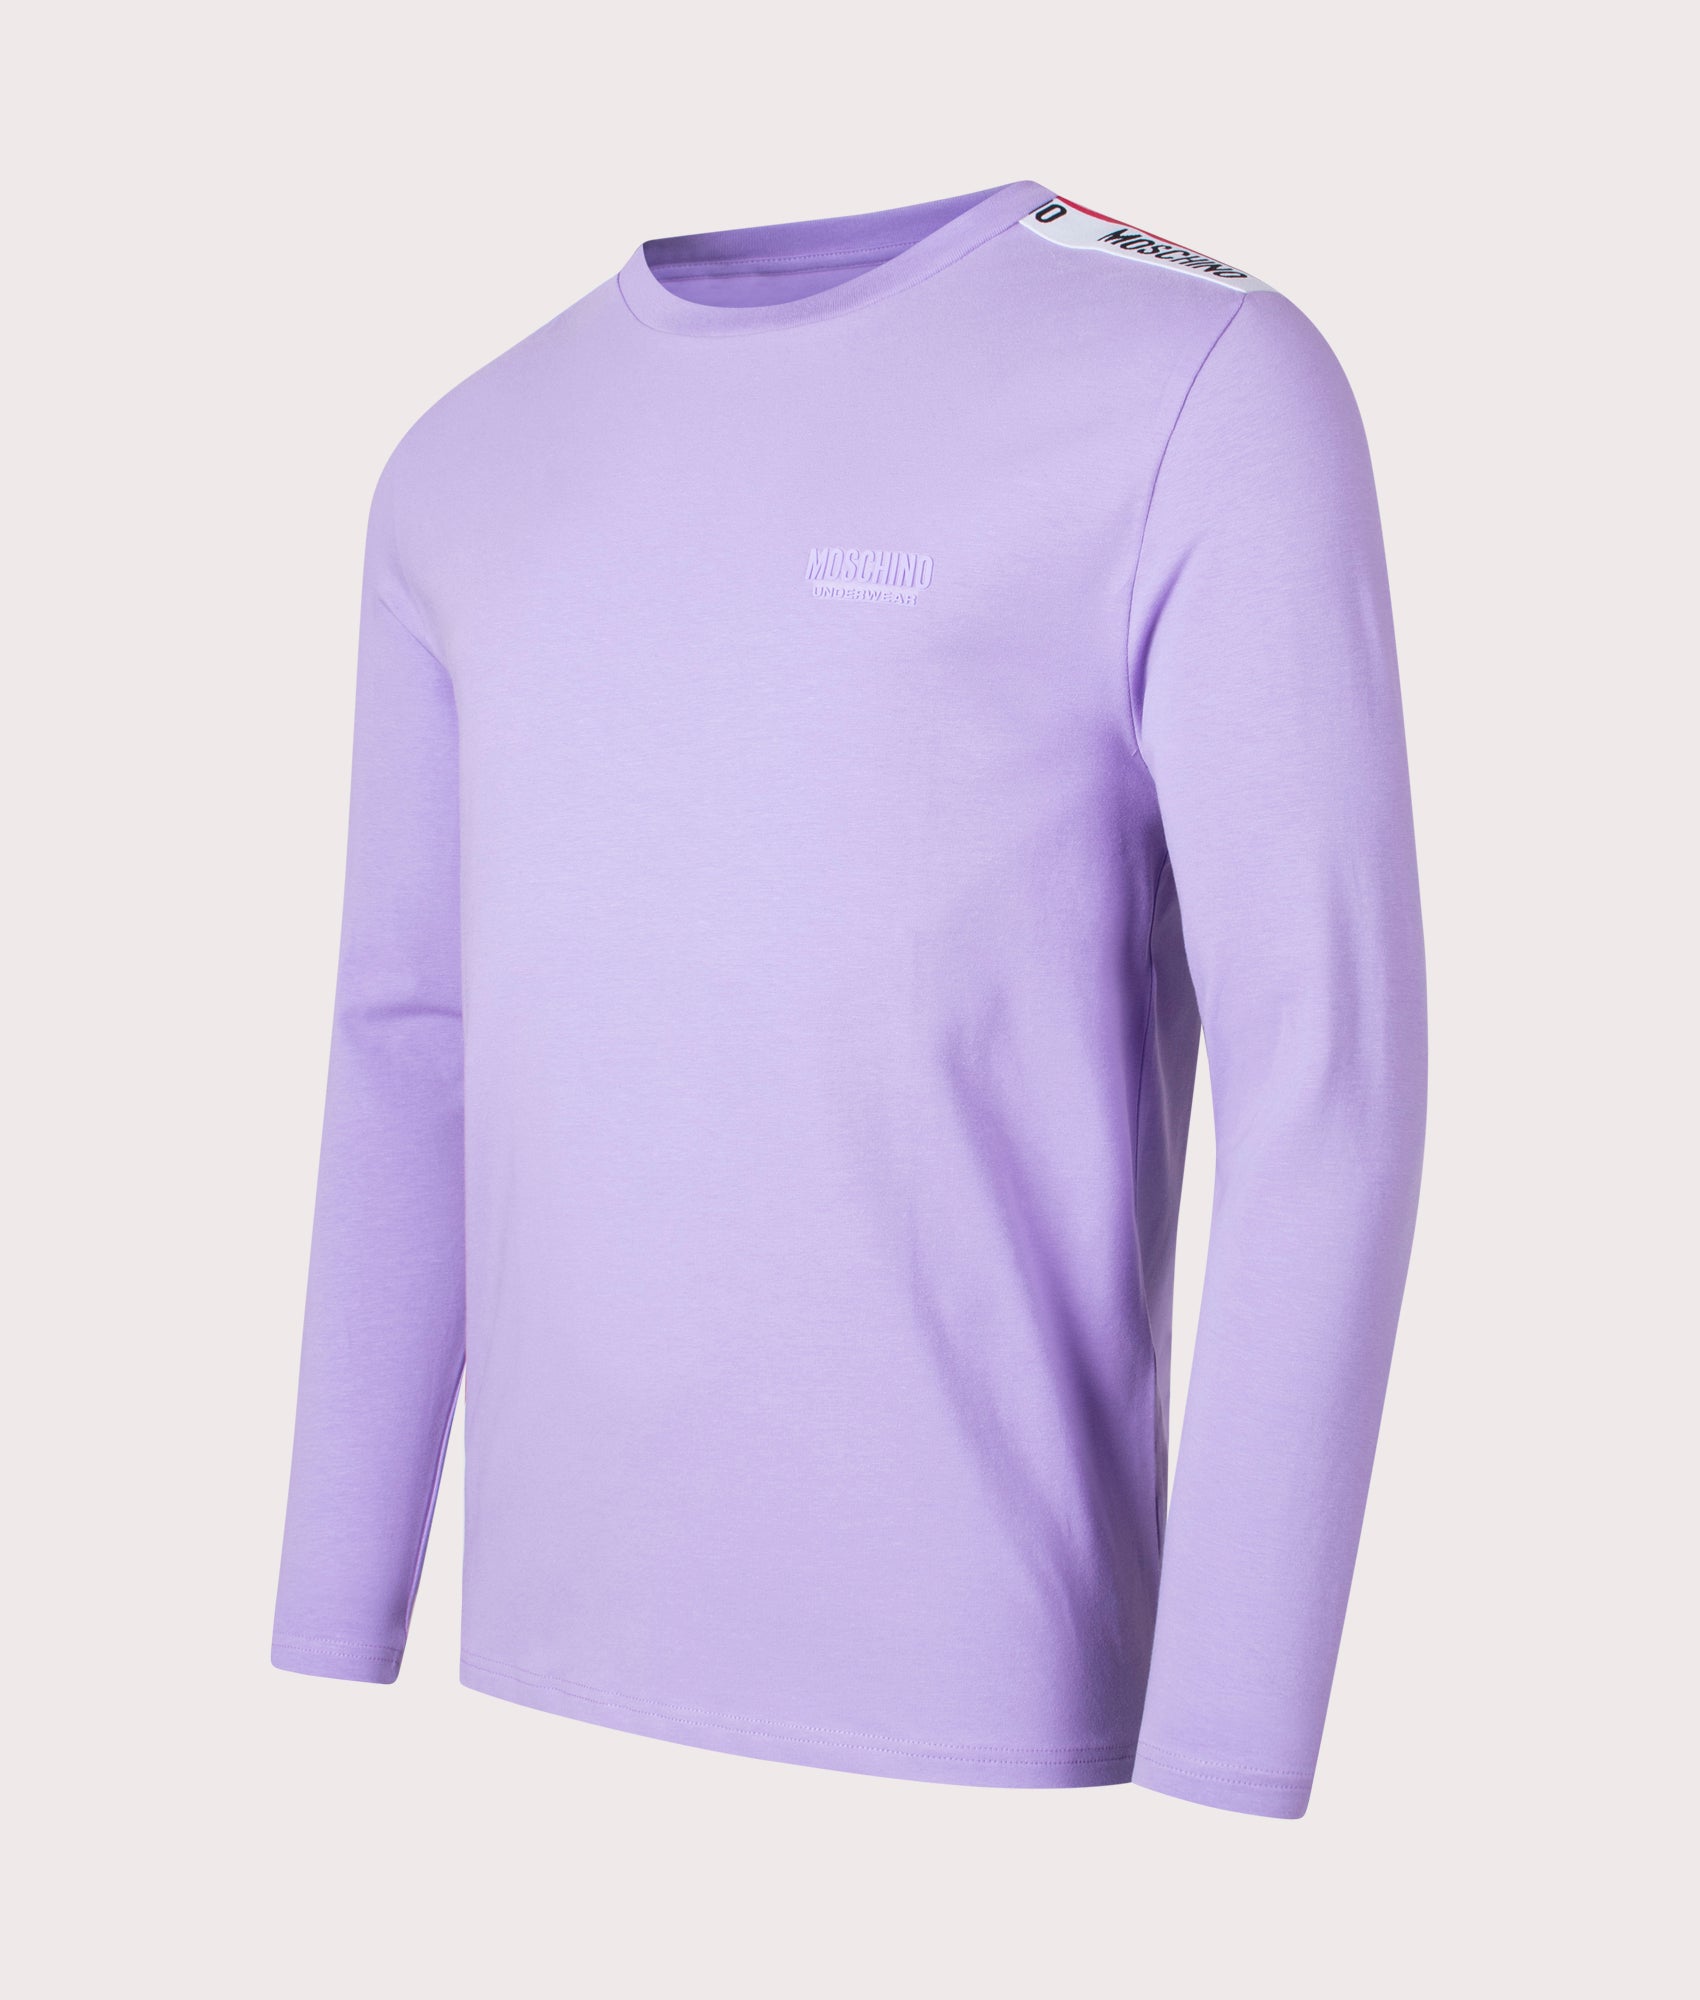 Moschino Mens Long Sleeve Shoulder Taped T-Shirt - Colour: 247 Violet - Size: Large